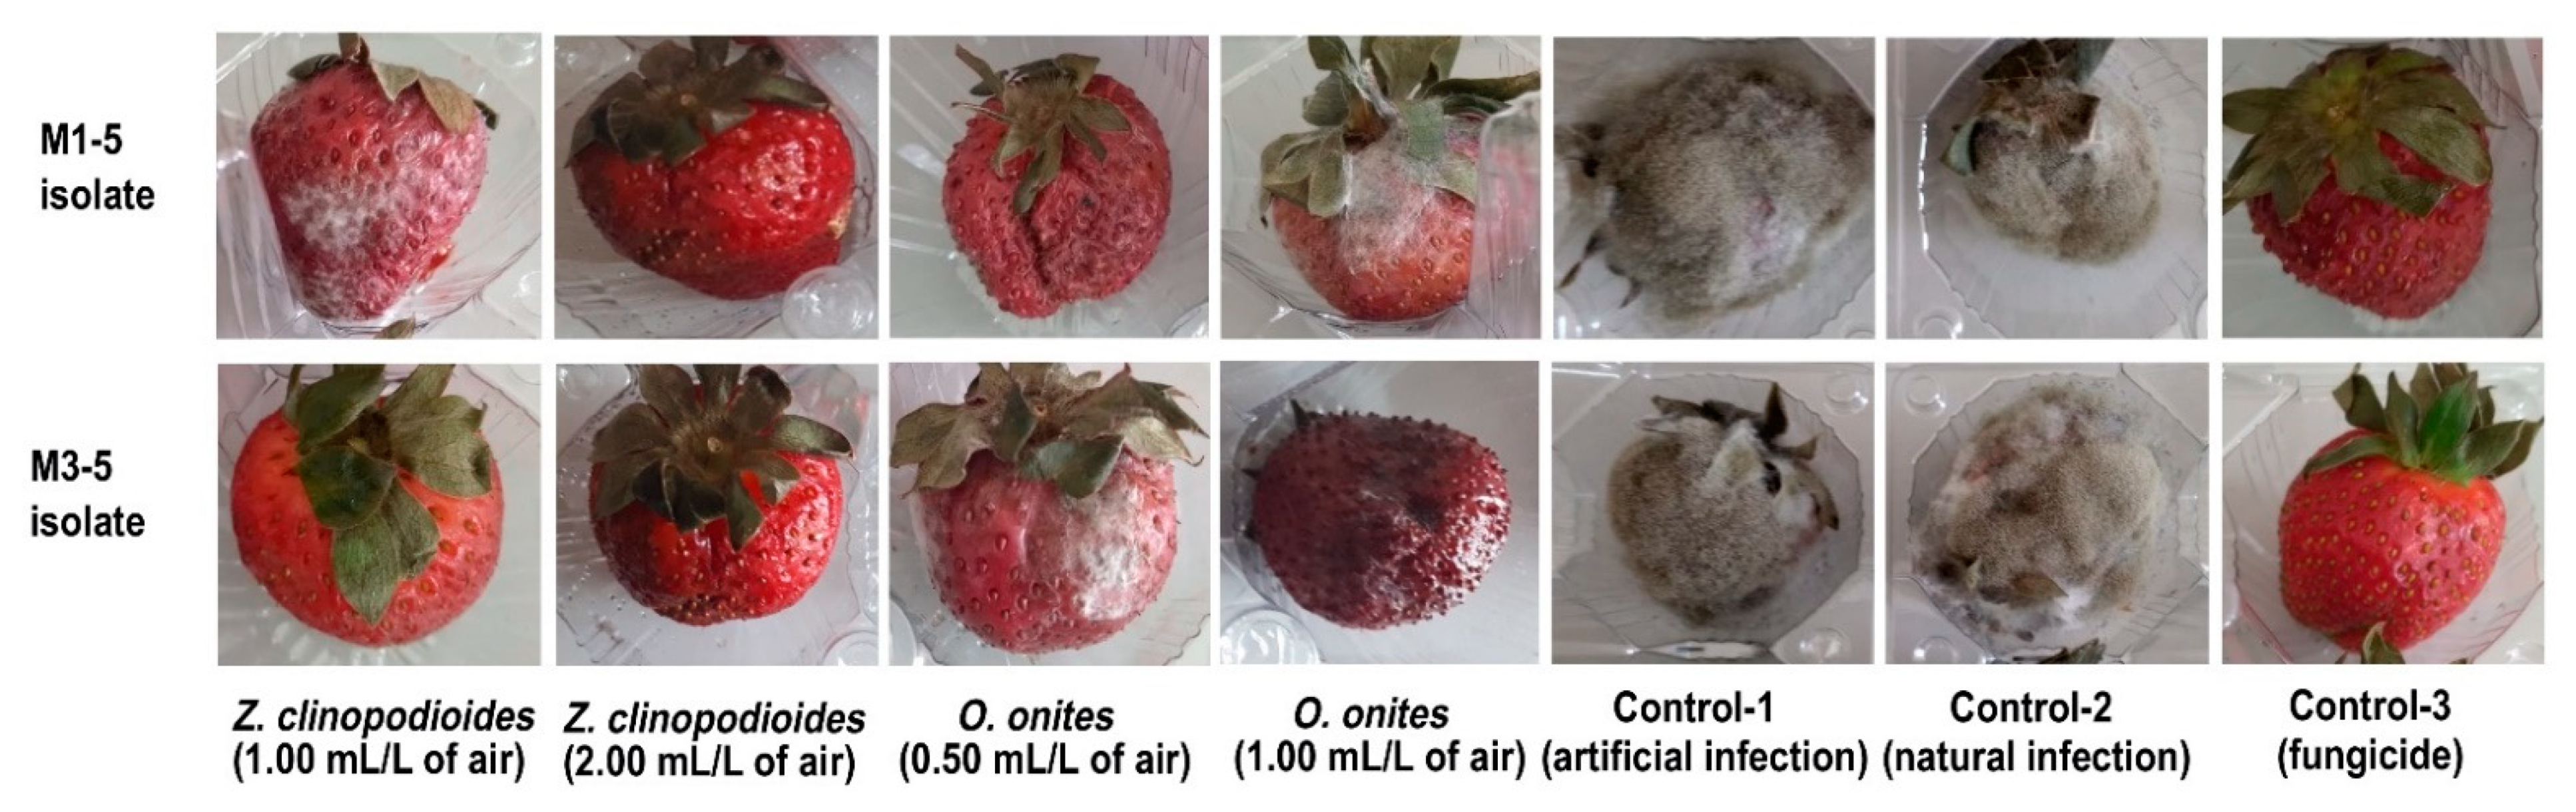 Gray Mold Rot Of Strawberry, Greenlife